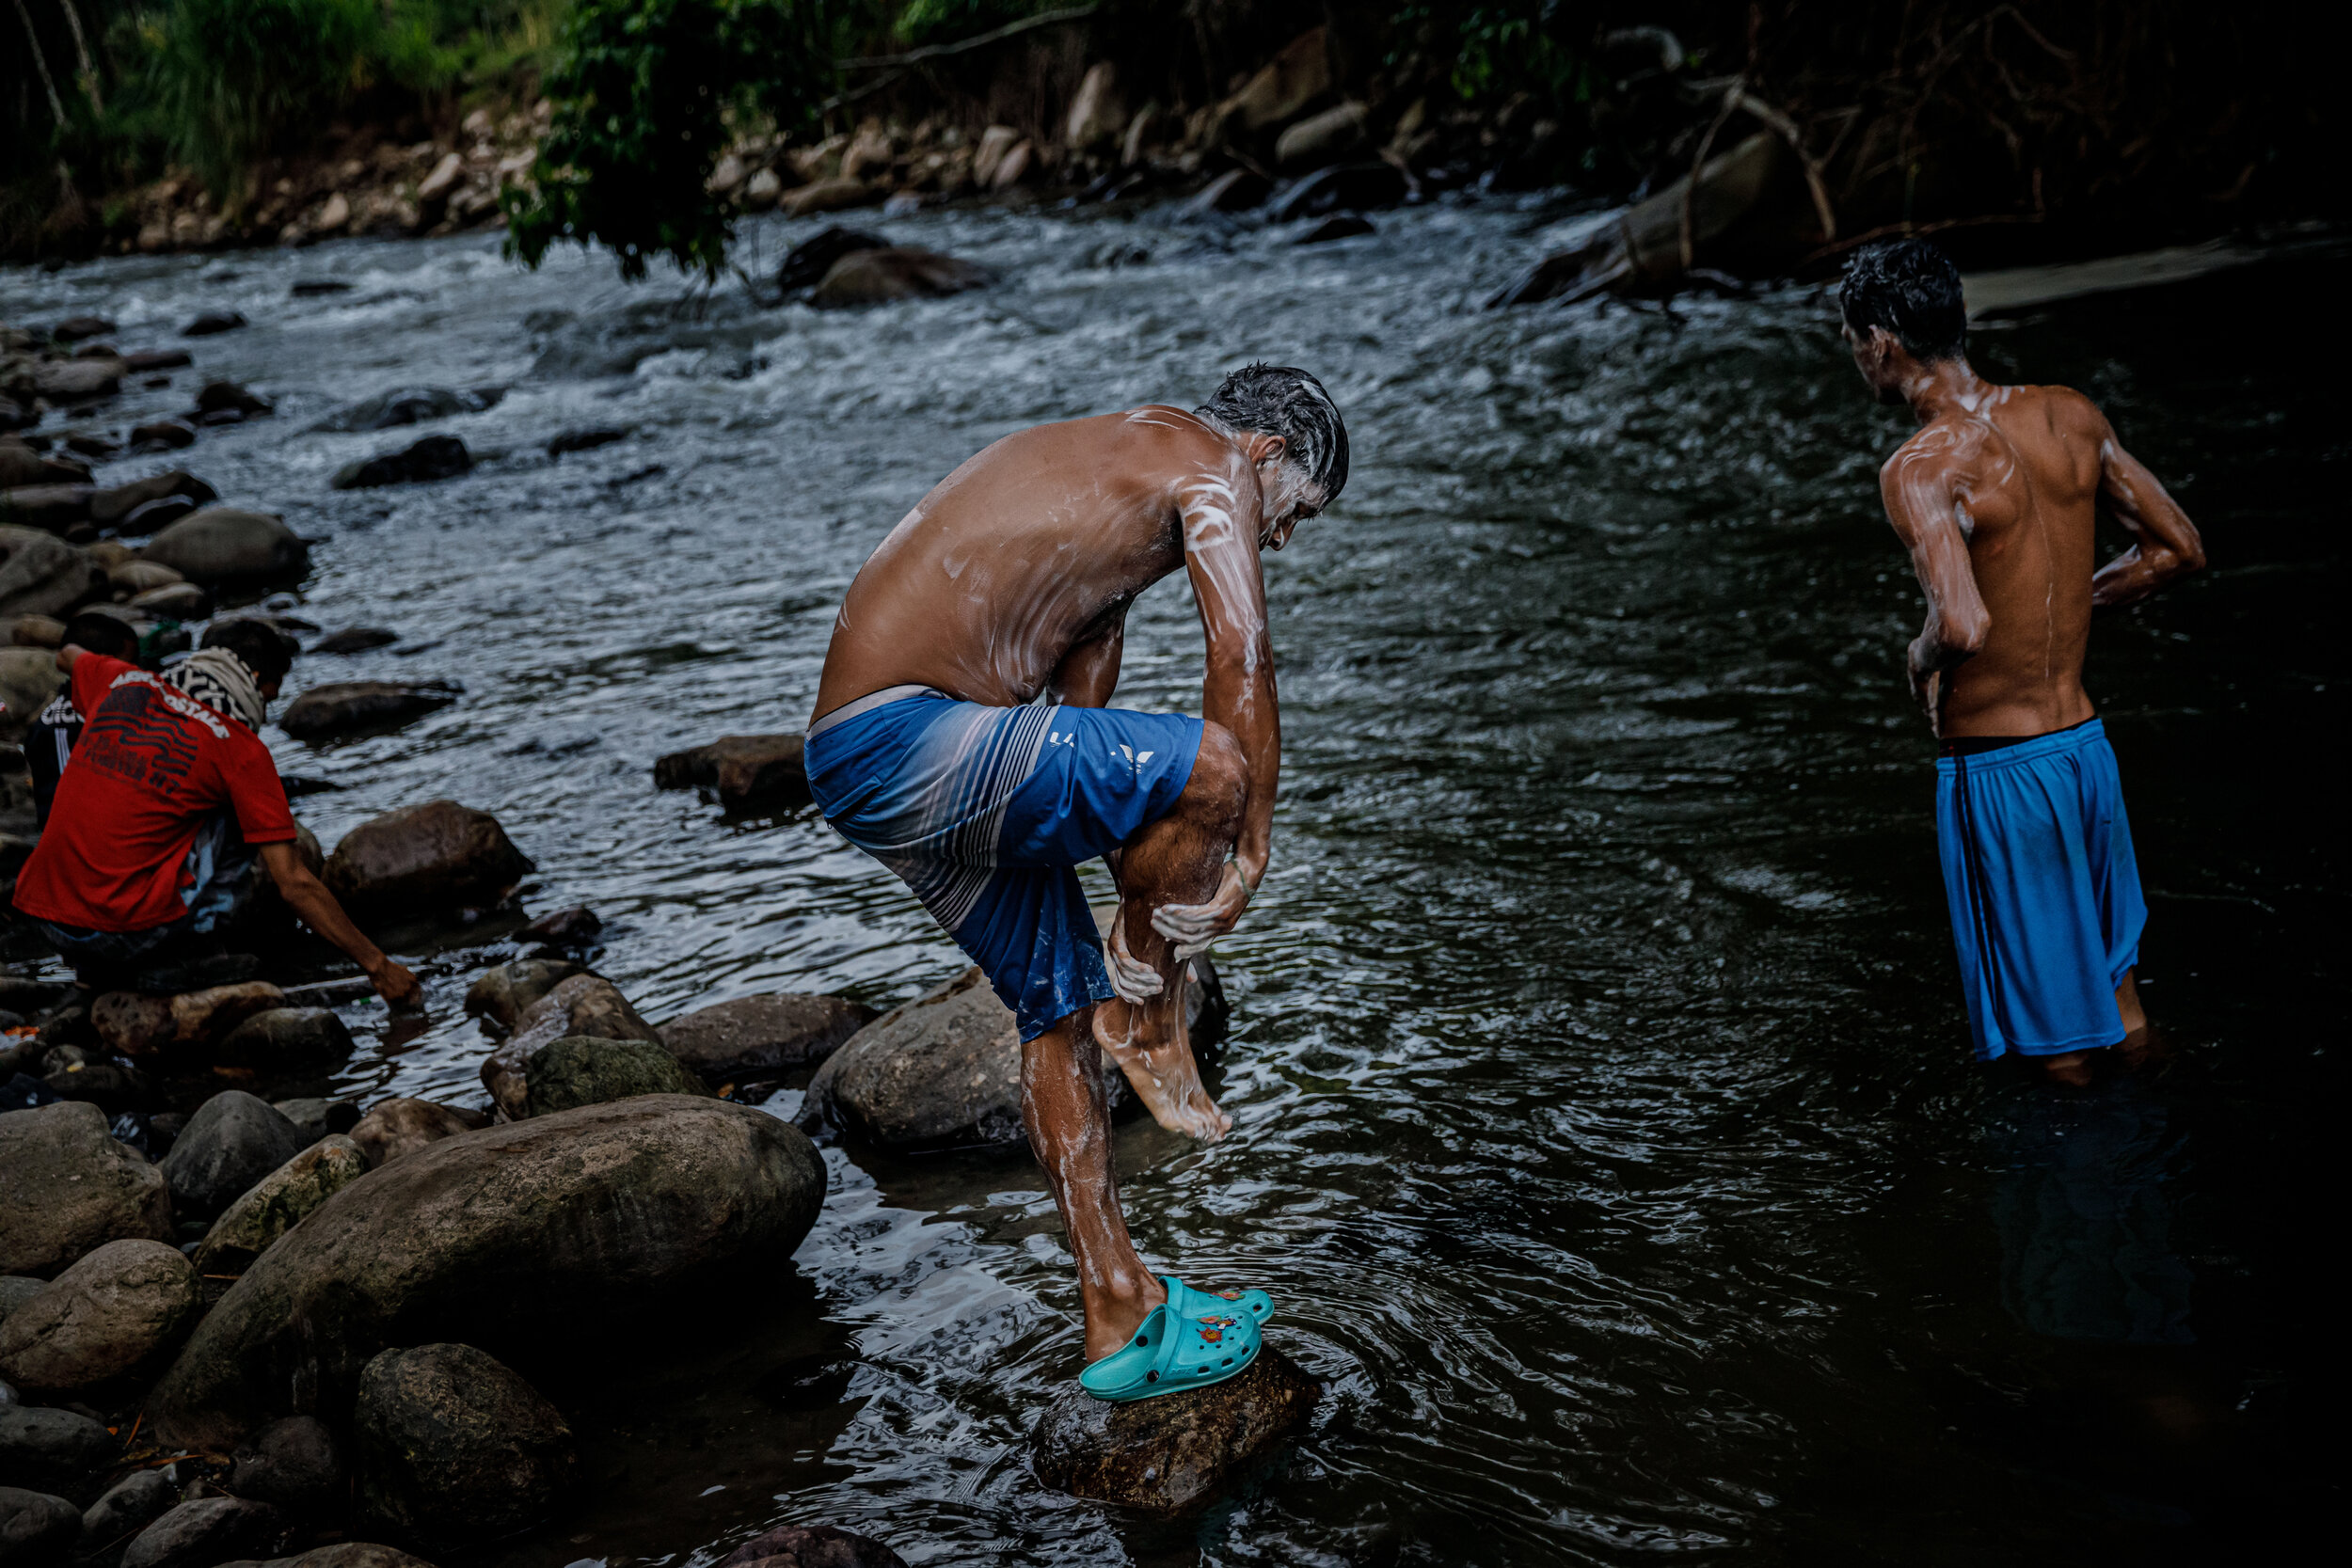  Venezuelans migrants traveling by foot, take a bath in the river at the campgrounds in Bochalema, Colombia, before they start on their aÊ120-mileÊjourney on that climbs more than 9,000 feet to a long and frigid plateau El Pramo de Berl’n before desc